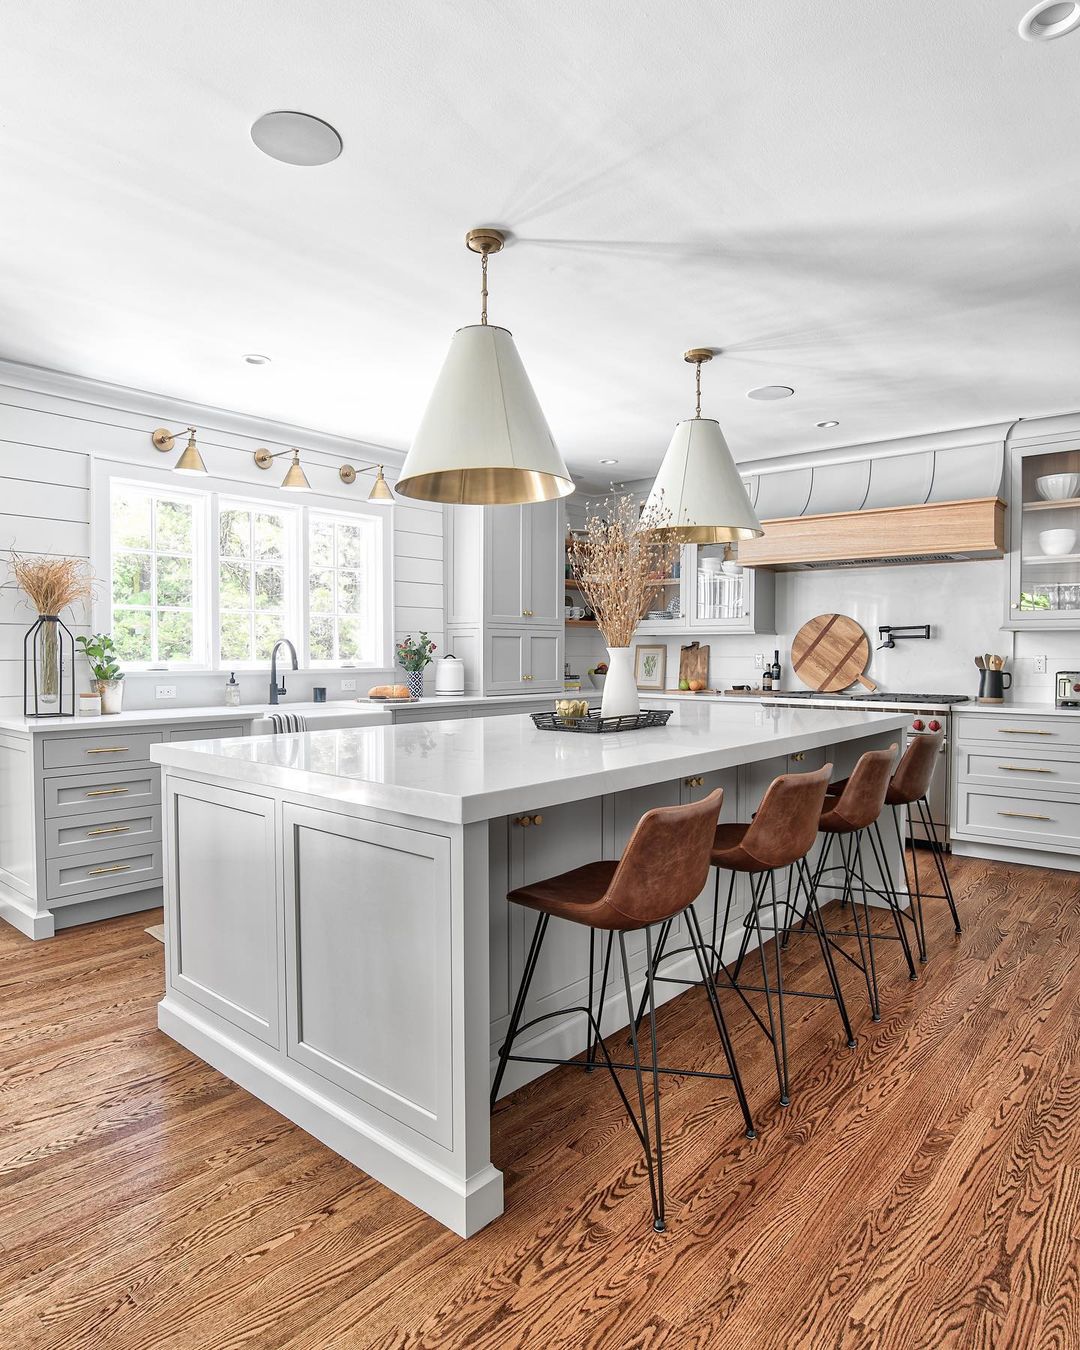 Gray Farmhouse Kitchen With Unique Lighting. Photo by Instagram user @chrisveithinteriors